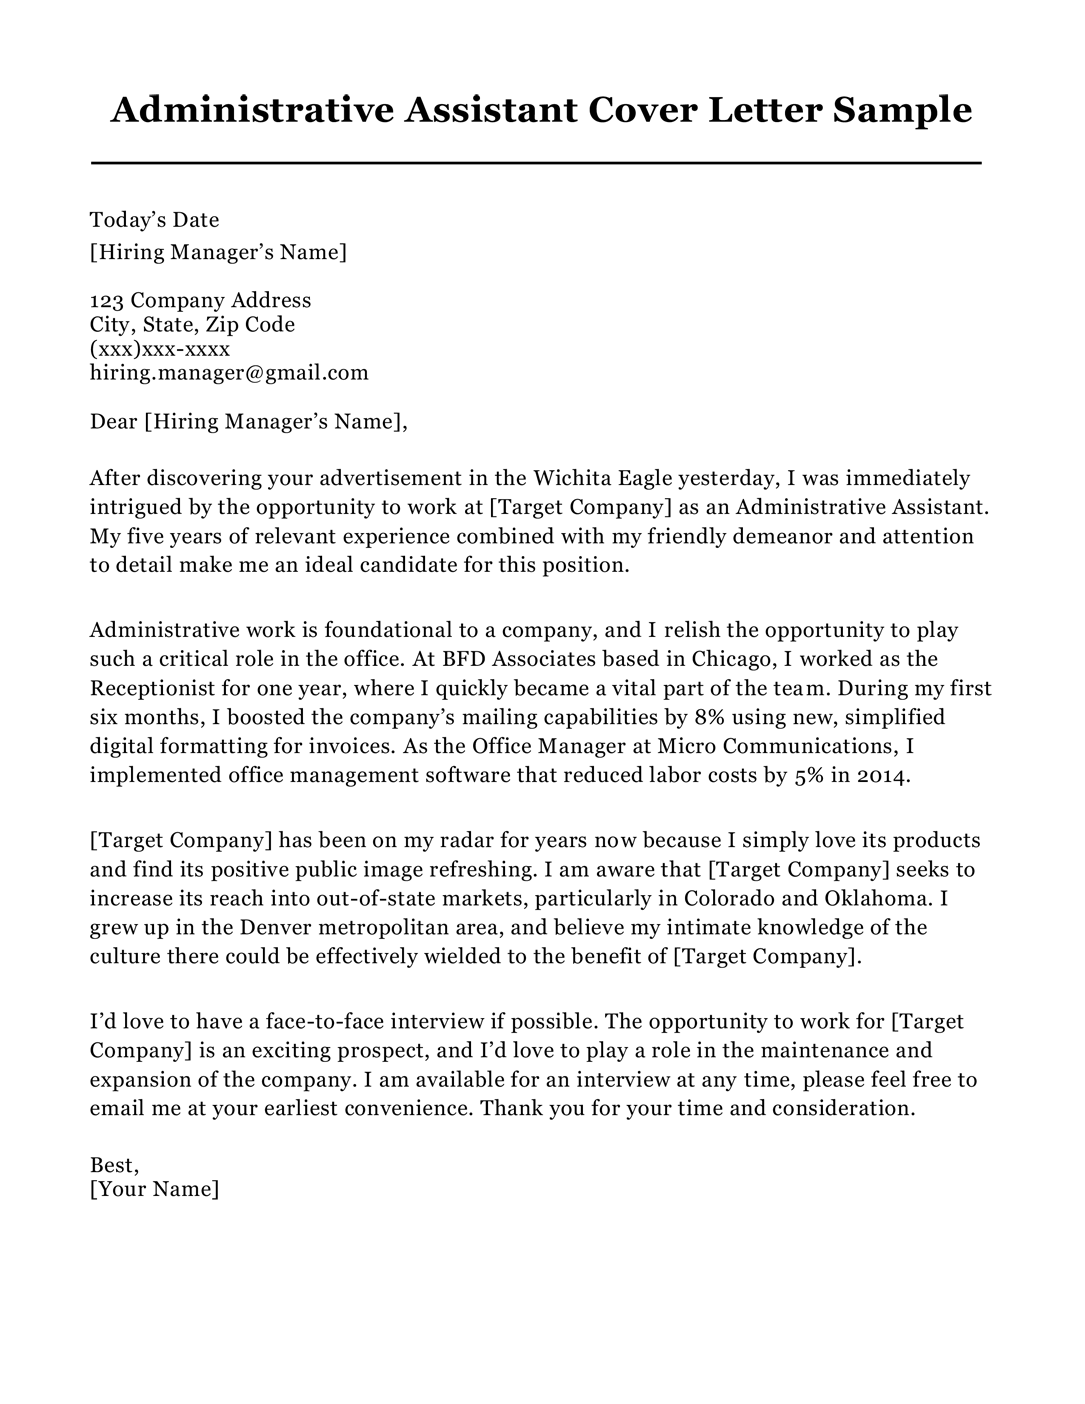 Cover Letter Sample For Admin Assistant from resumecompanion.com